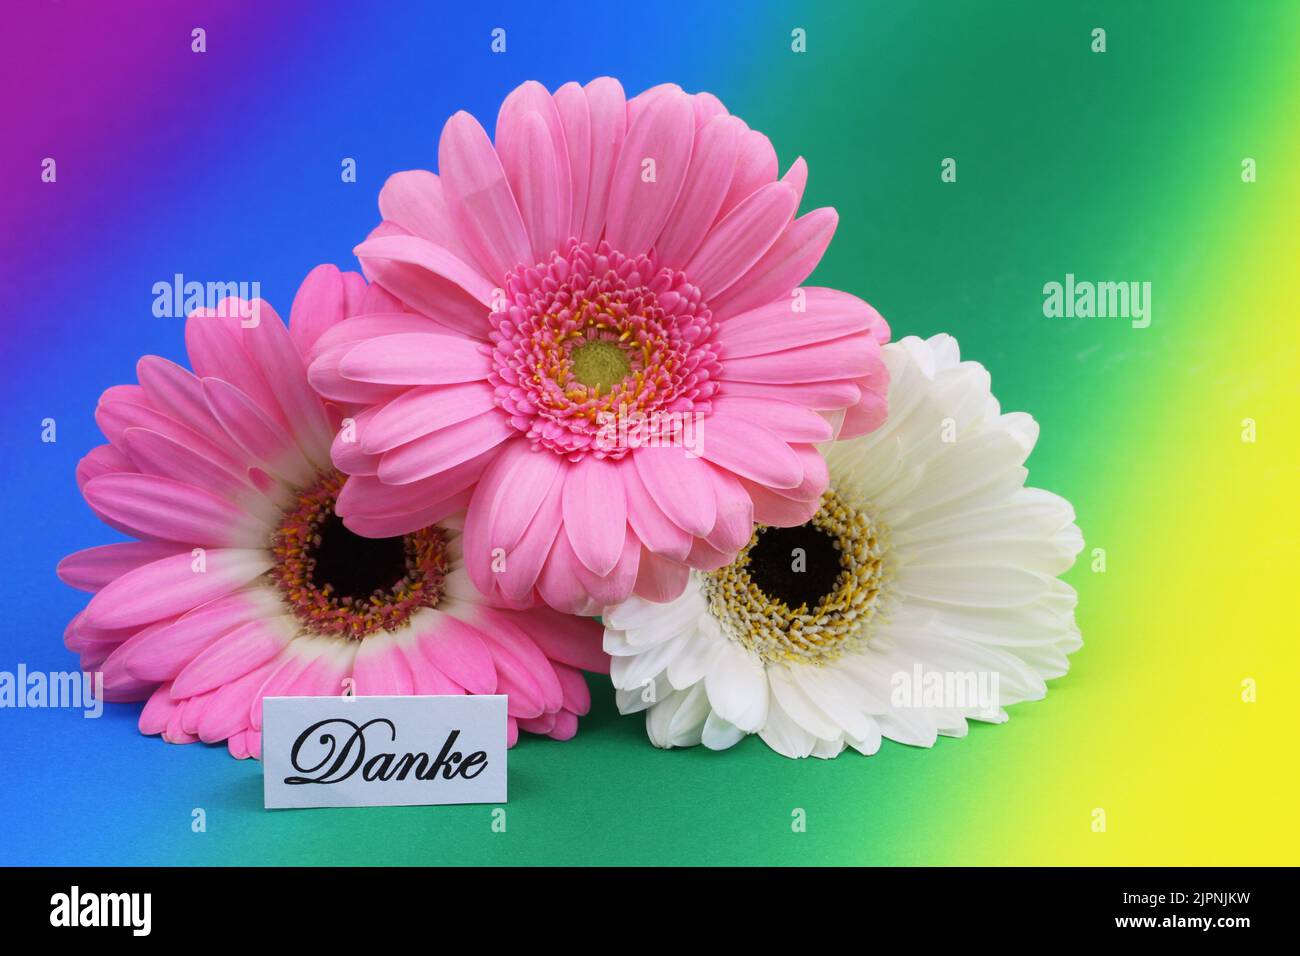 Danke (thank you in German) card with three colorful daisy flowers on rainbow background Stock Photo